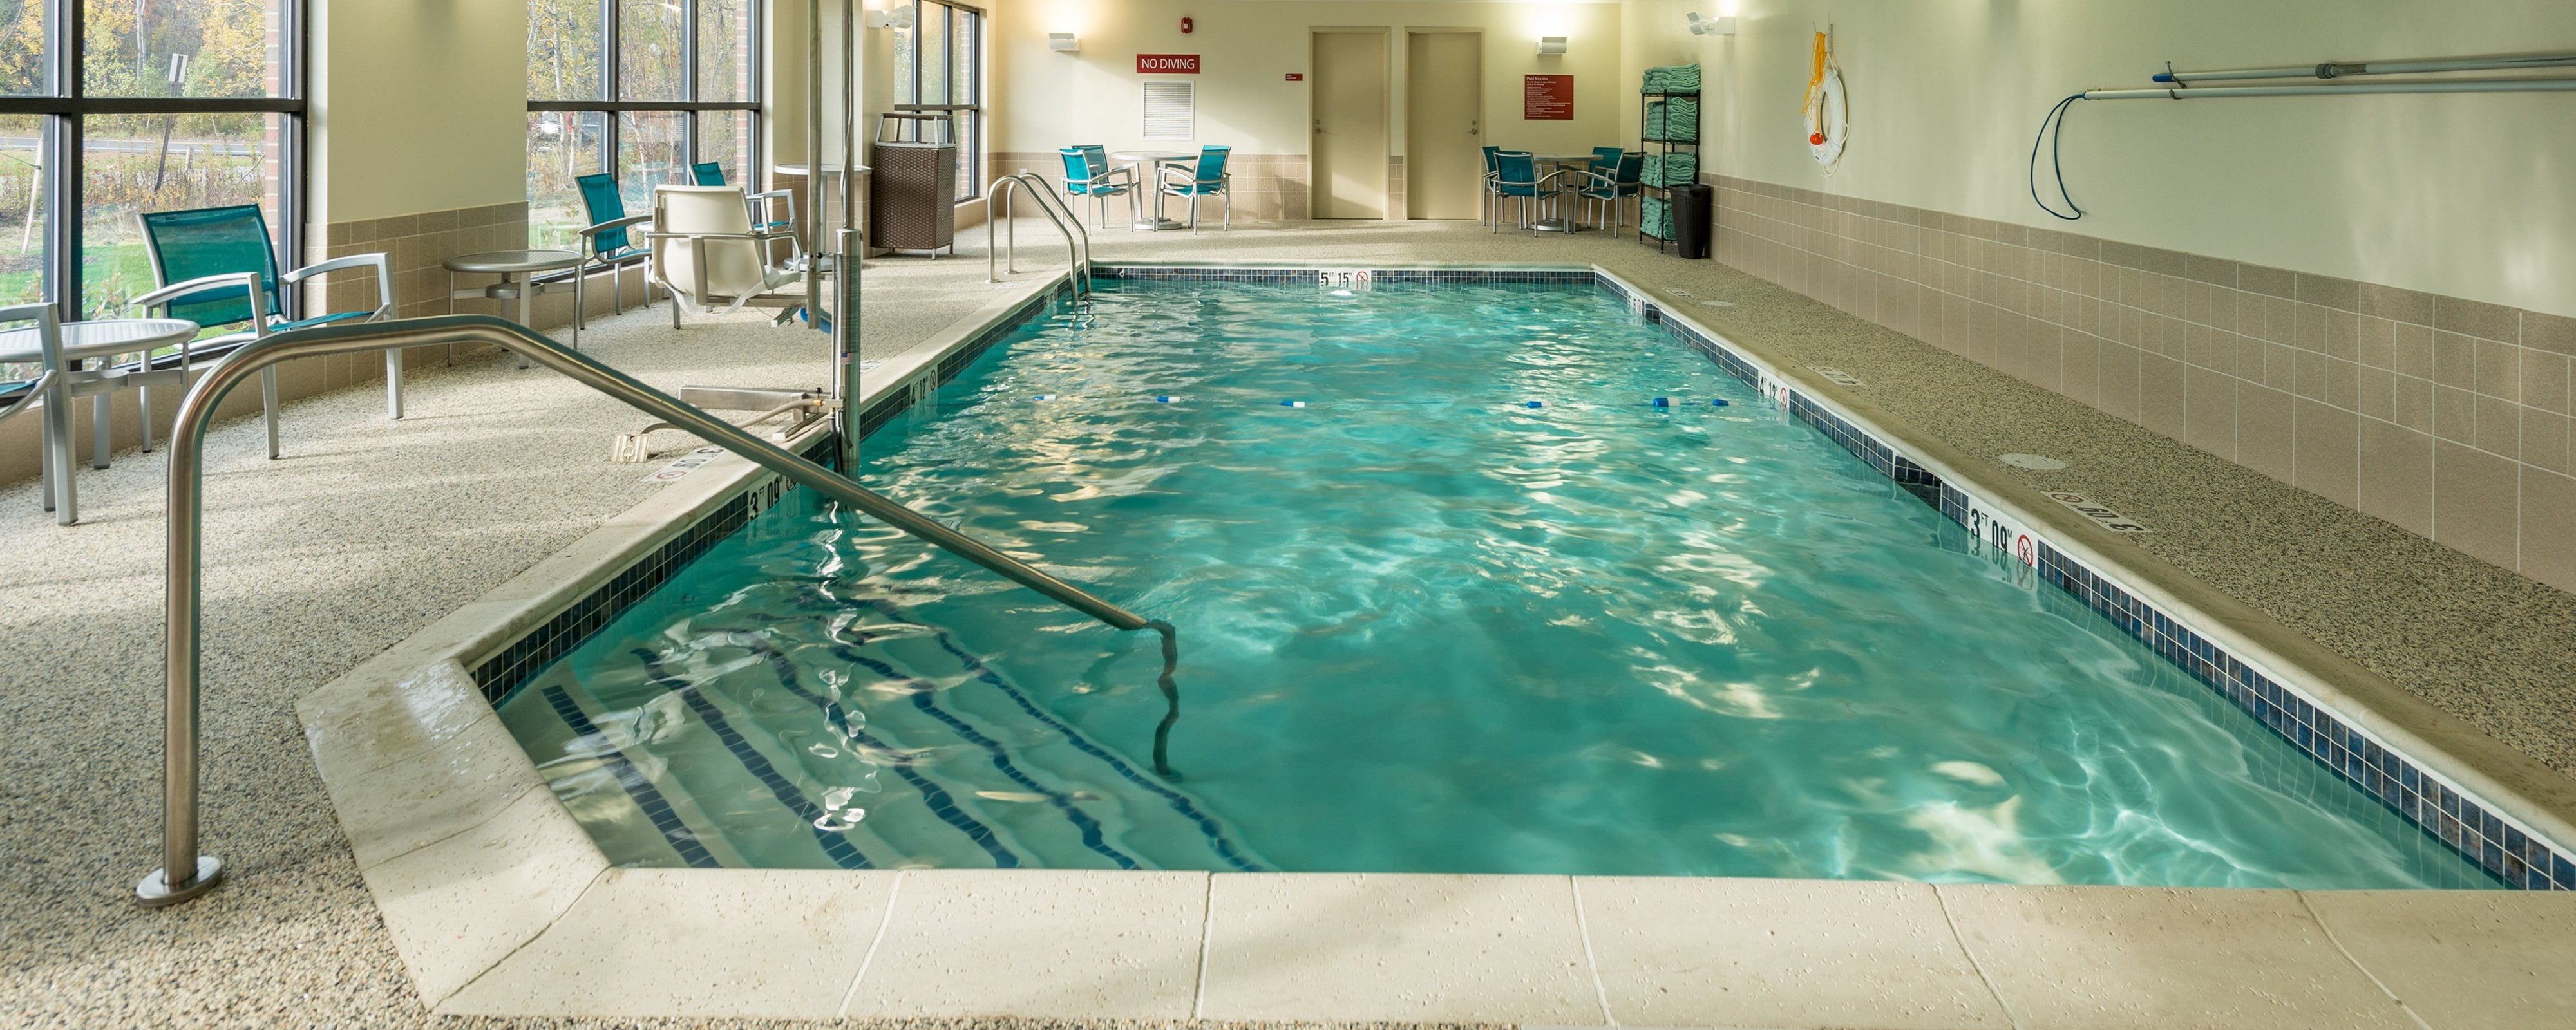 Hotels in Bangor, Maine with Indoor Pool | TownePlace ...